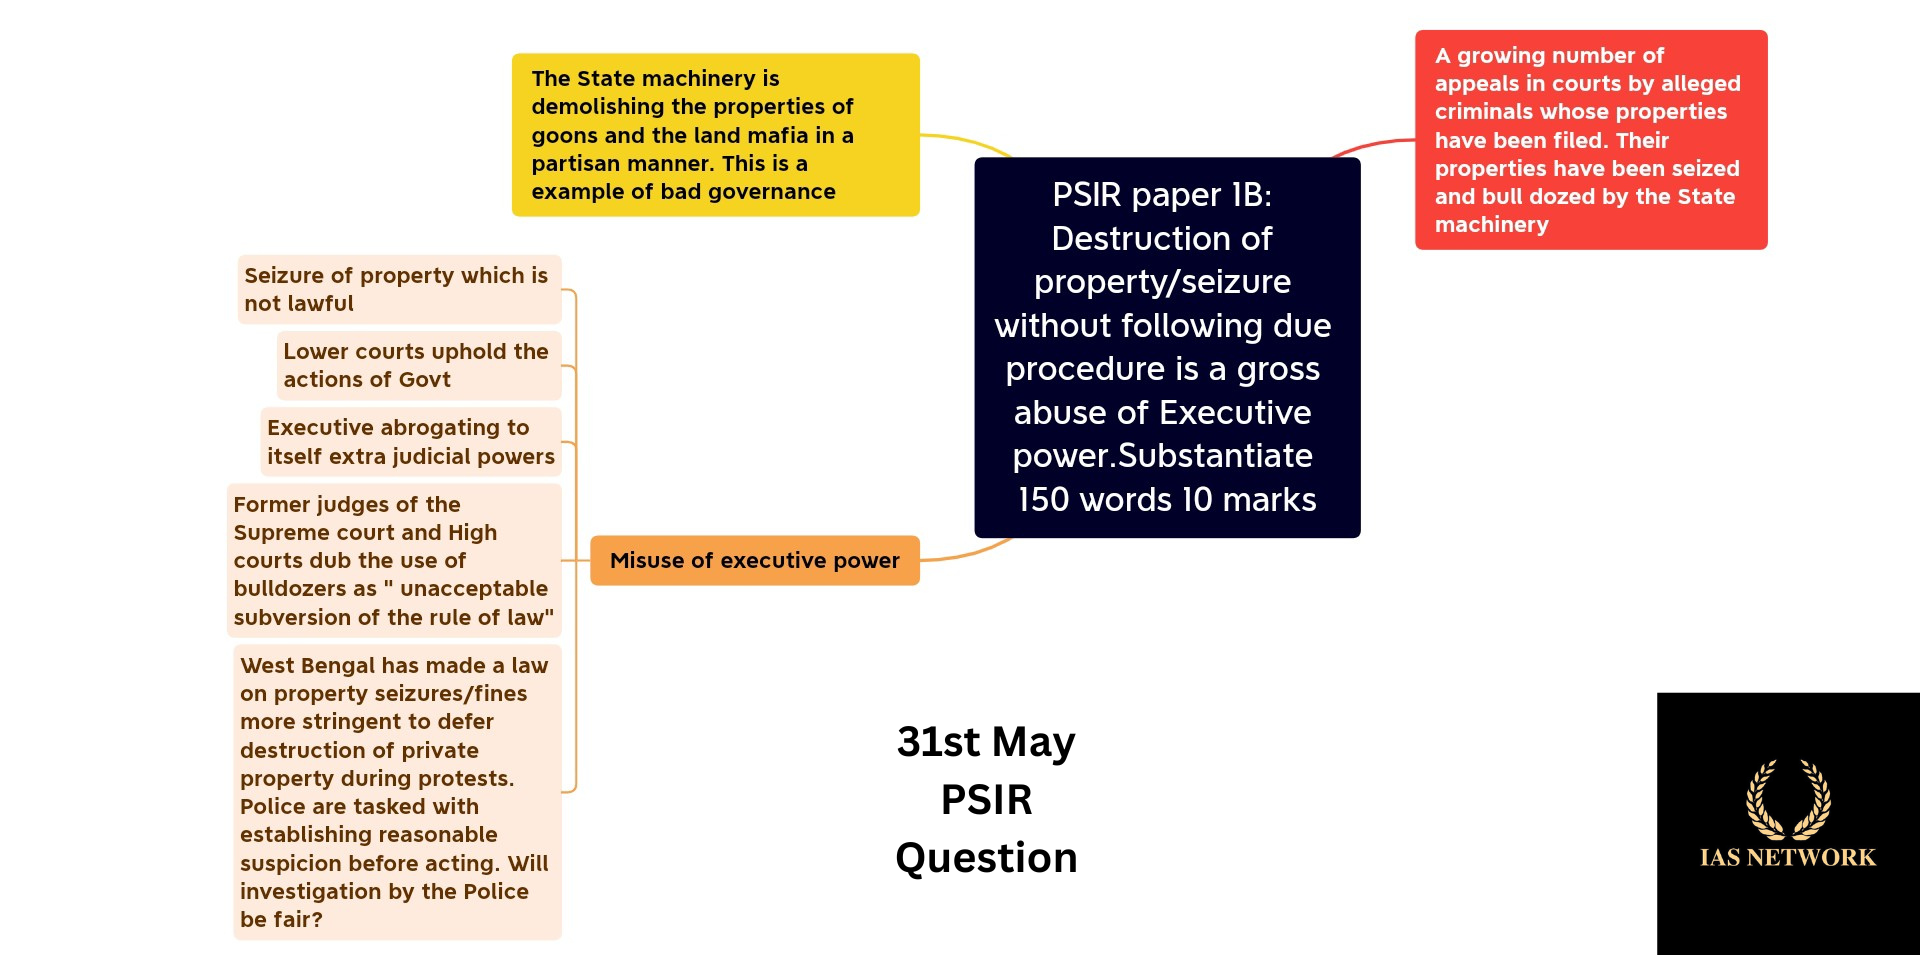 IAS NETWORK 31st MAY PSIR QUESTION